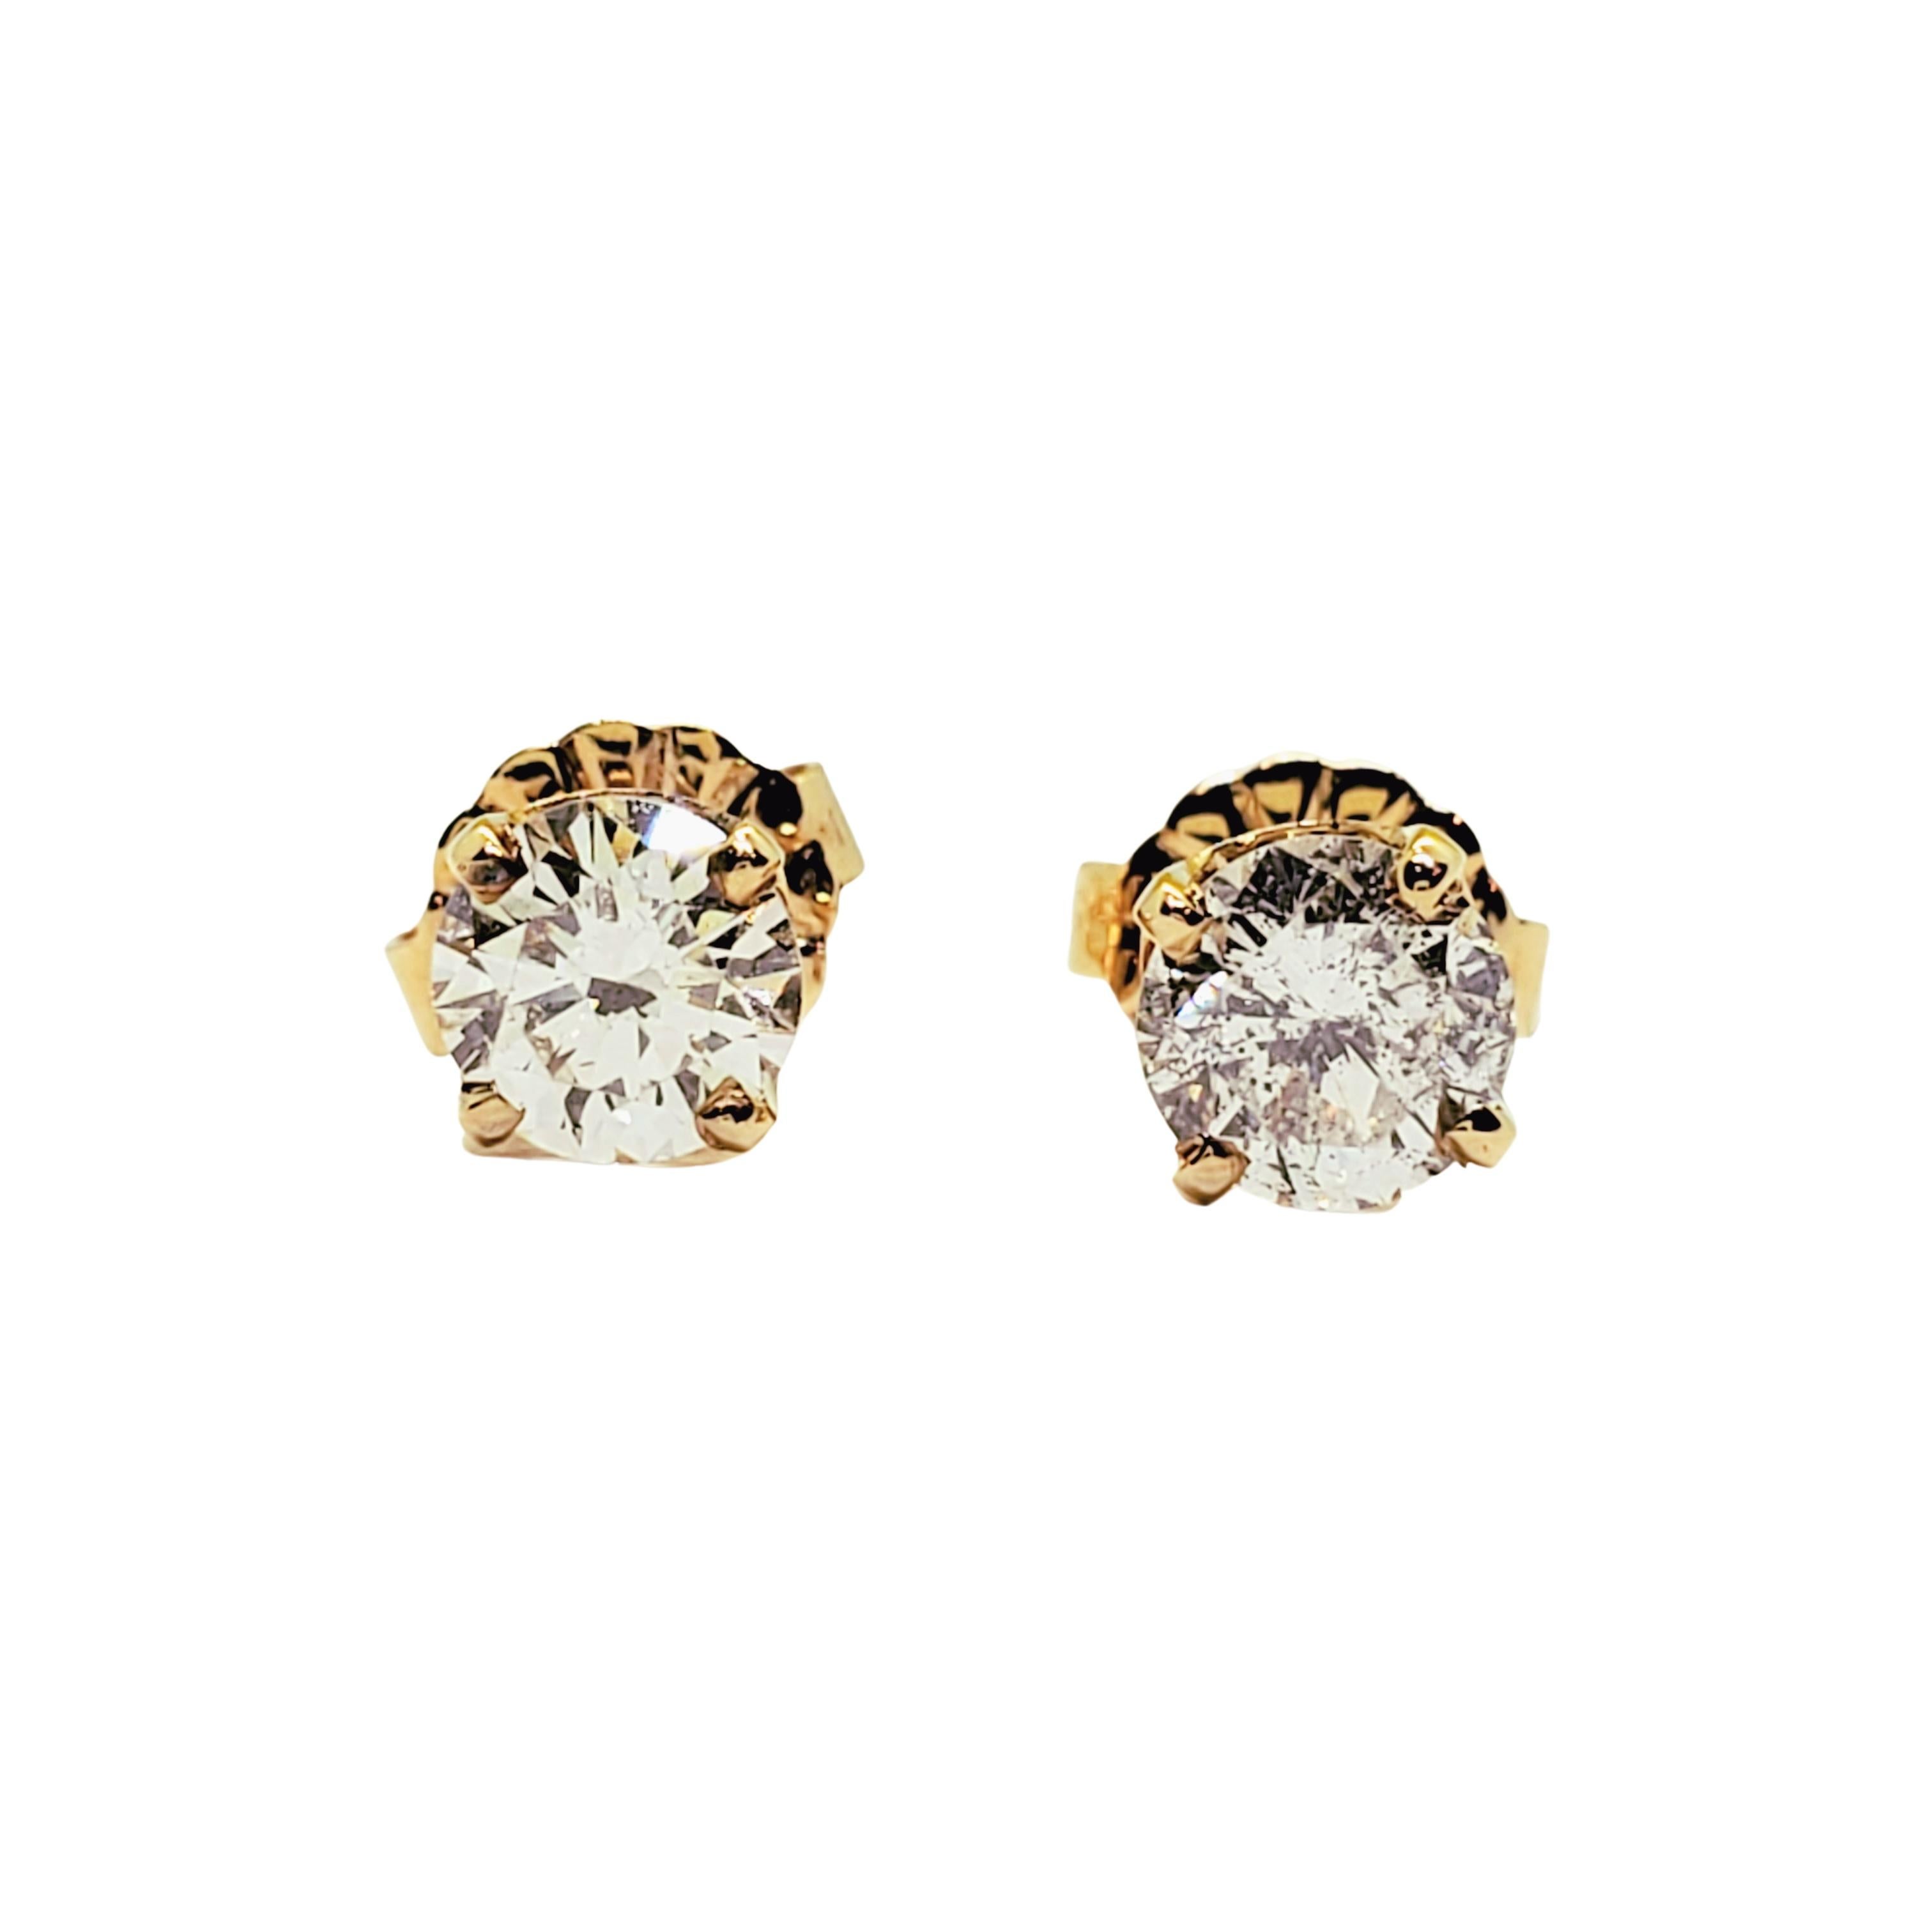 Vintage 14 Karat Yellow Gold Diamond Stud Earrings (.73 ct. twt.)

These sparkling stud earrings each feature one round brilliant cut diamond set in classic 14K yellow gold. Push back closures.

Approximate total diamond weight: .73 ct.

Diamond